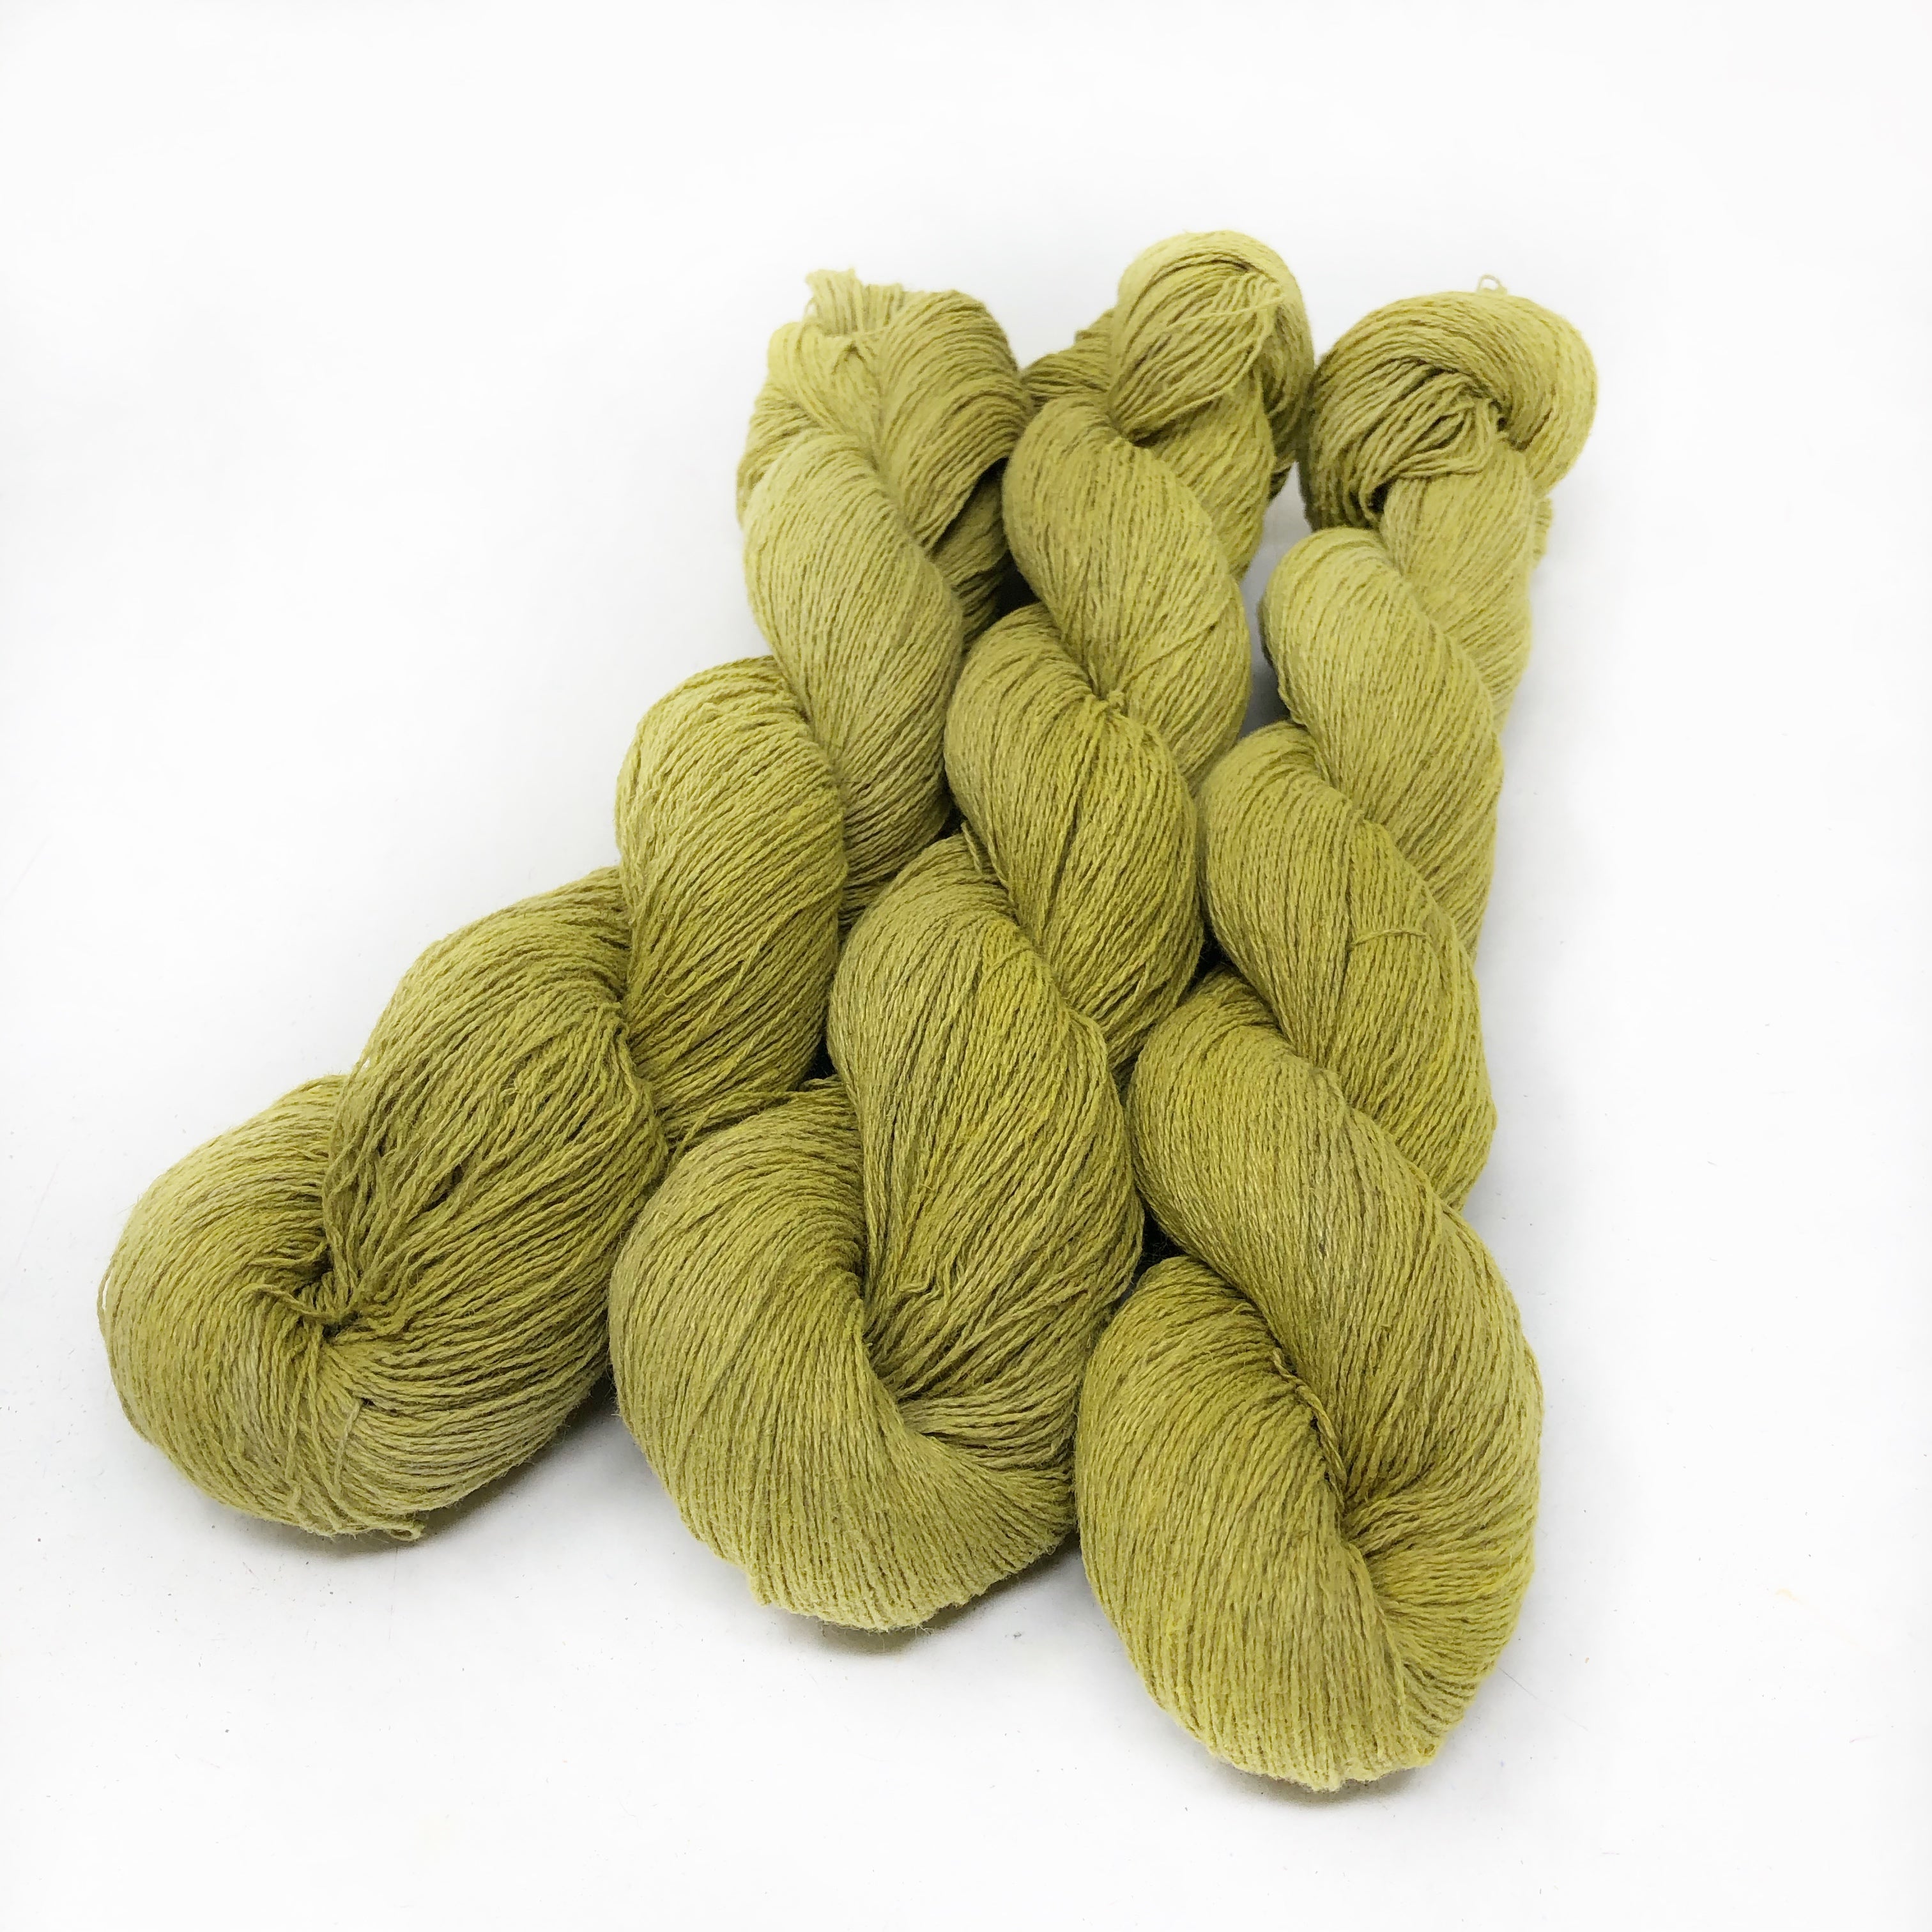 Plant Dyed, raw Linen